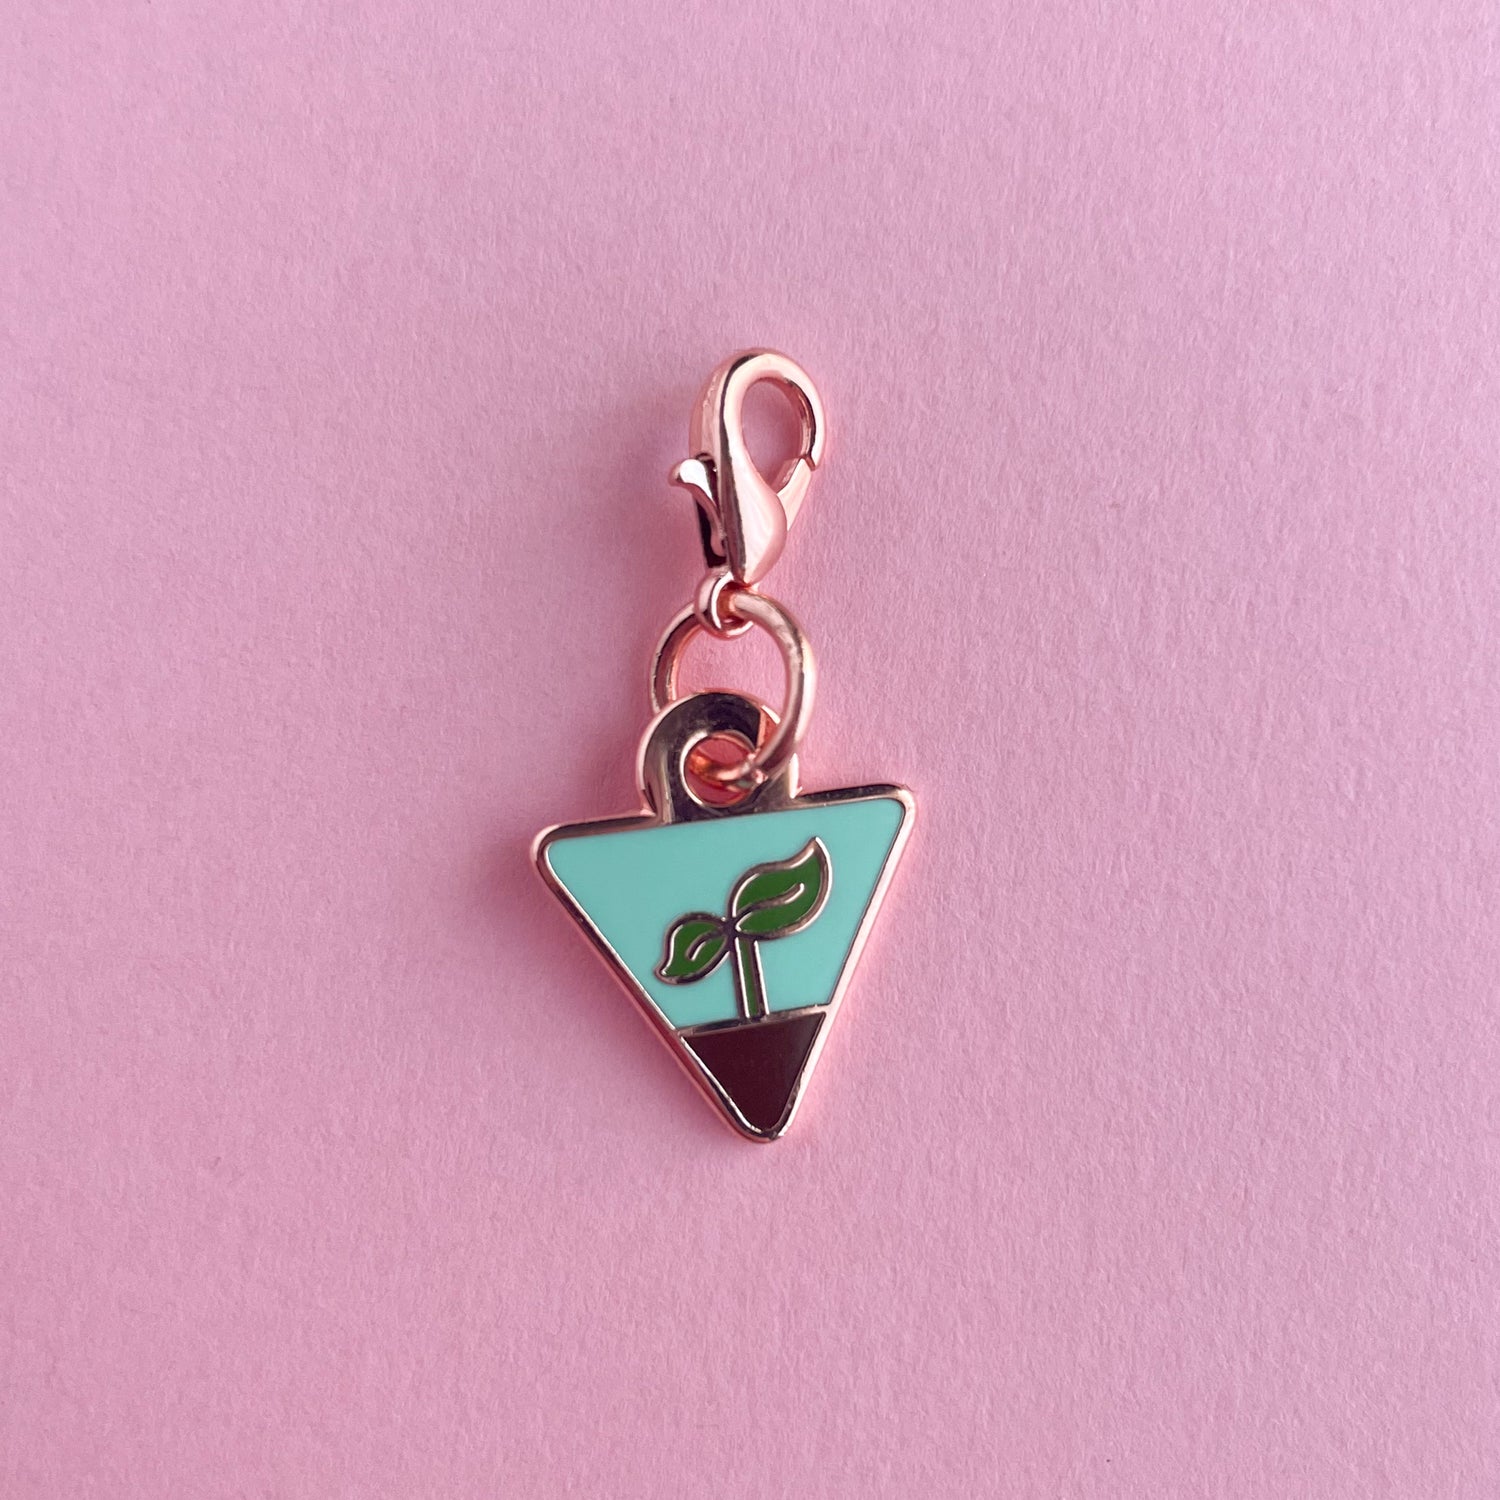 A charm in the shape of an upside down triangle with a small plant sprout growing out of some dirt on it.  The charm is on a pink background.